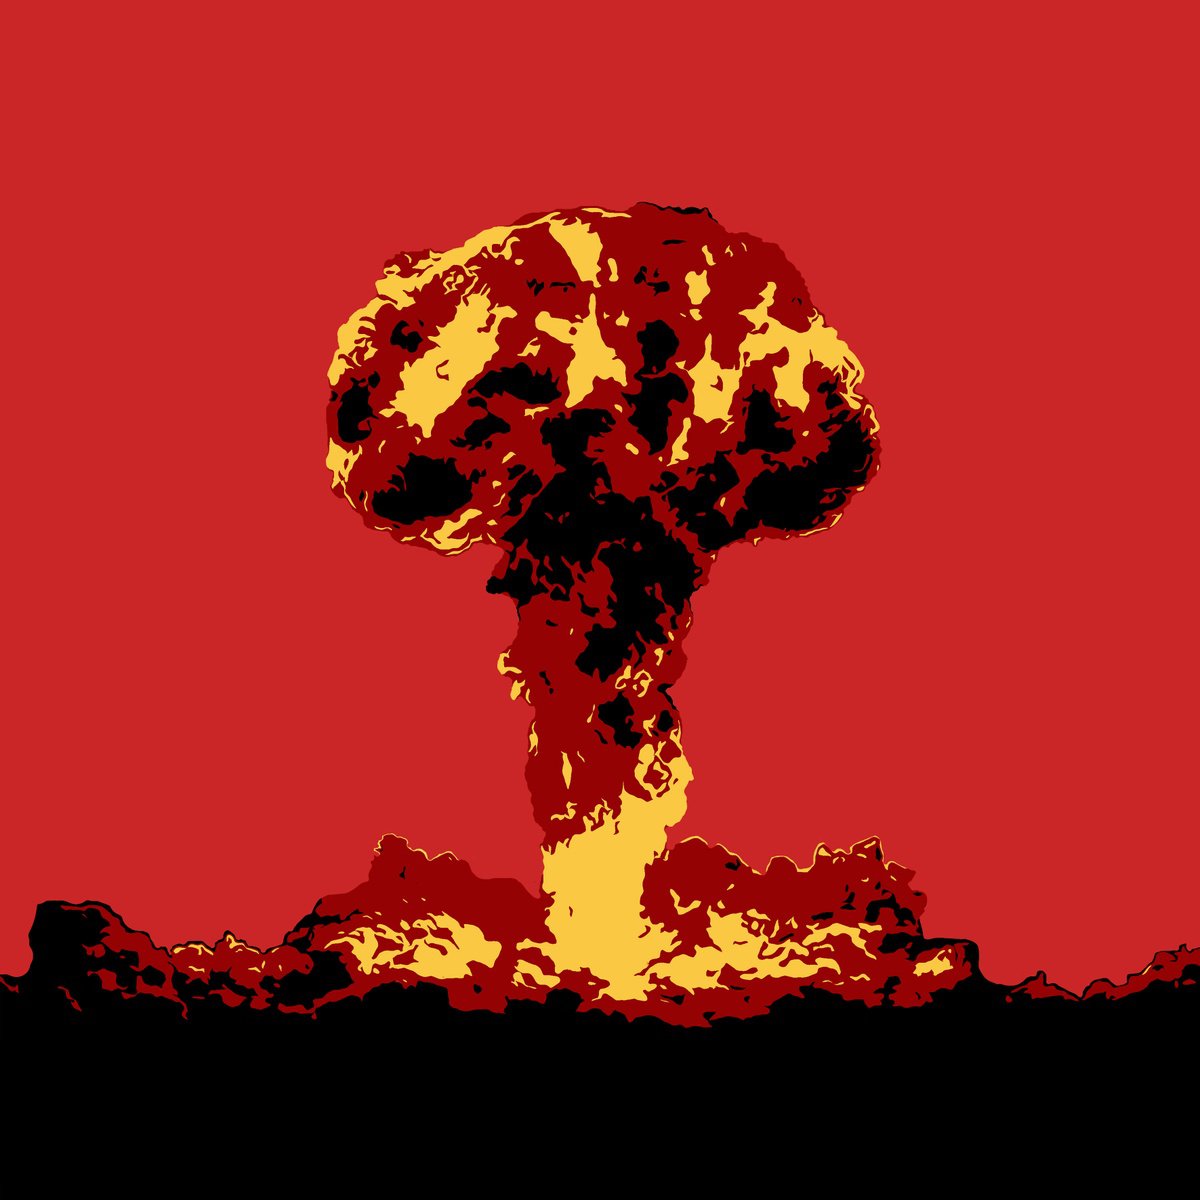 Nuclear Explosion red by Kosta Morr